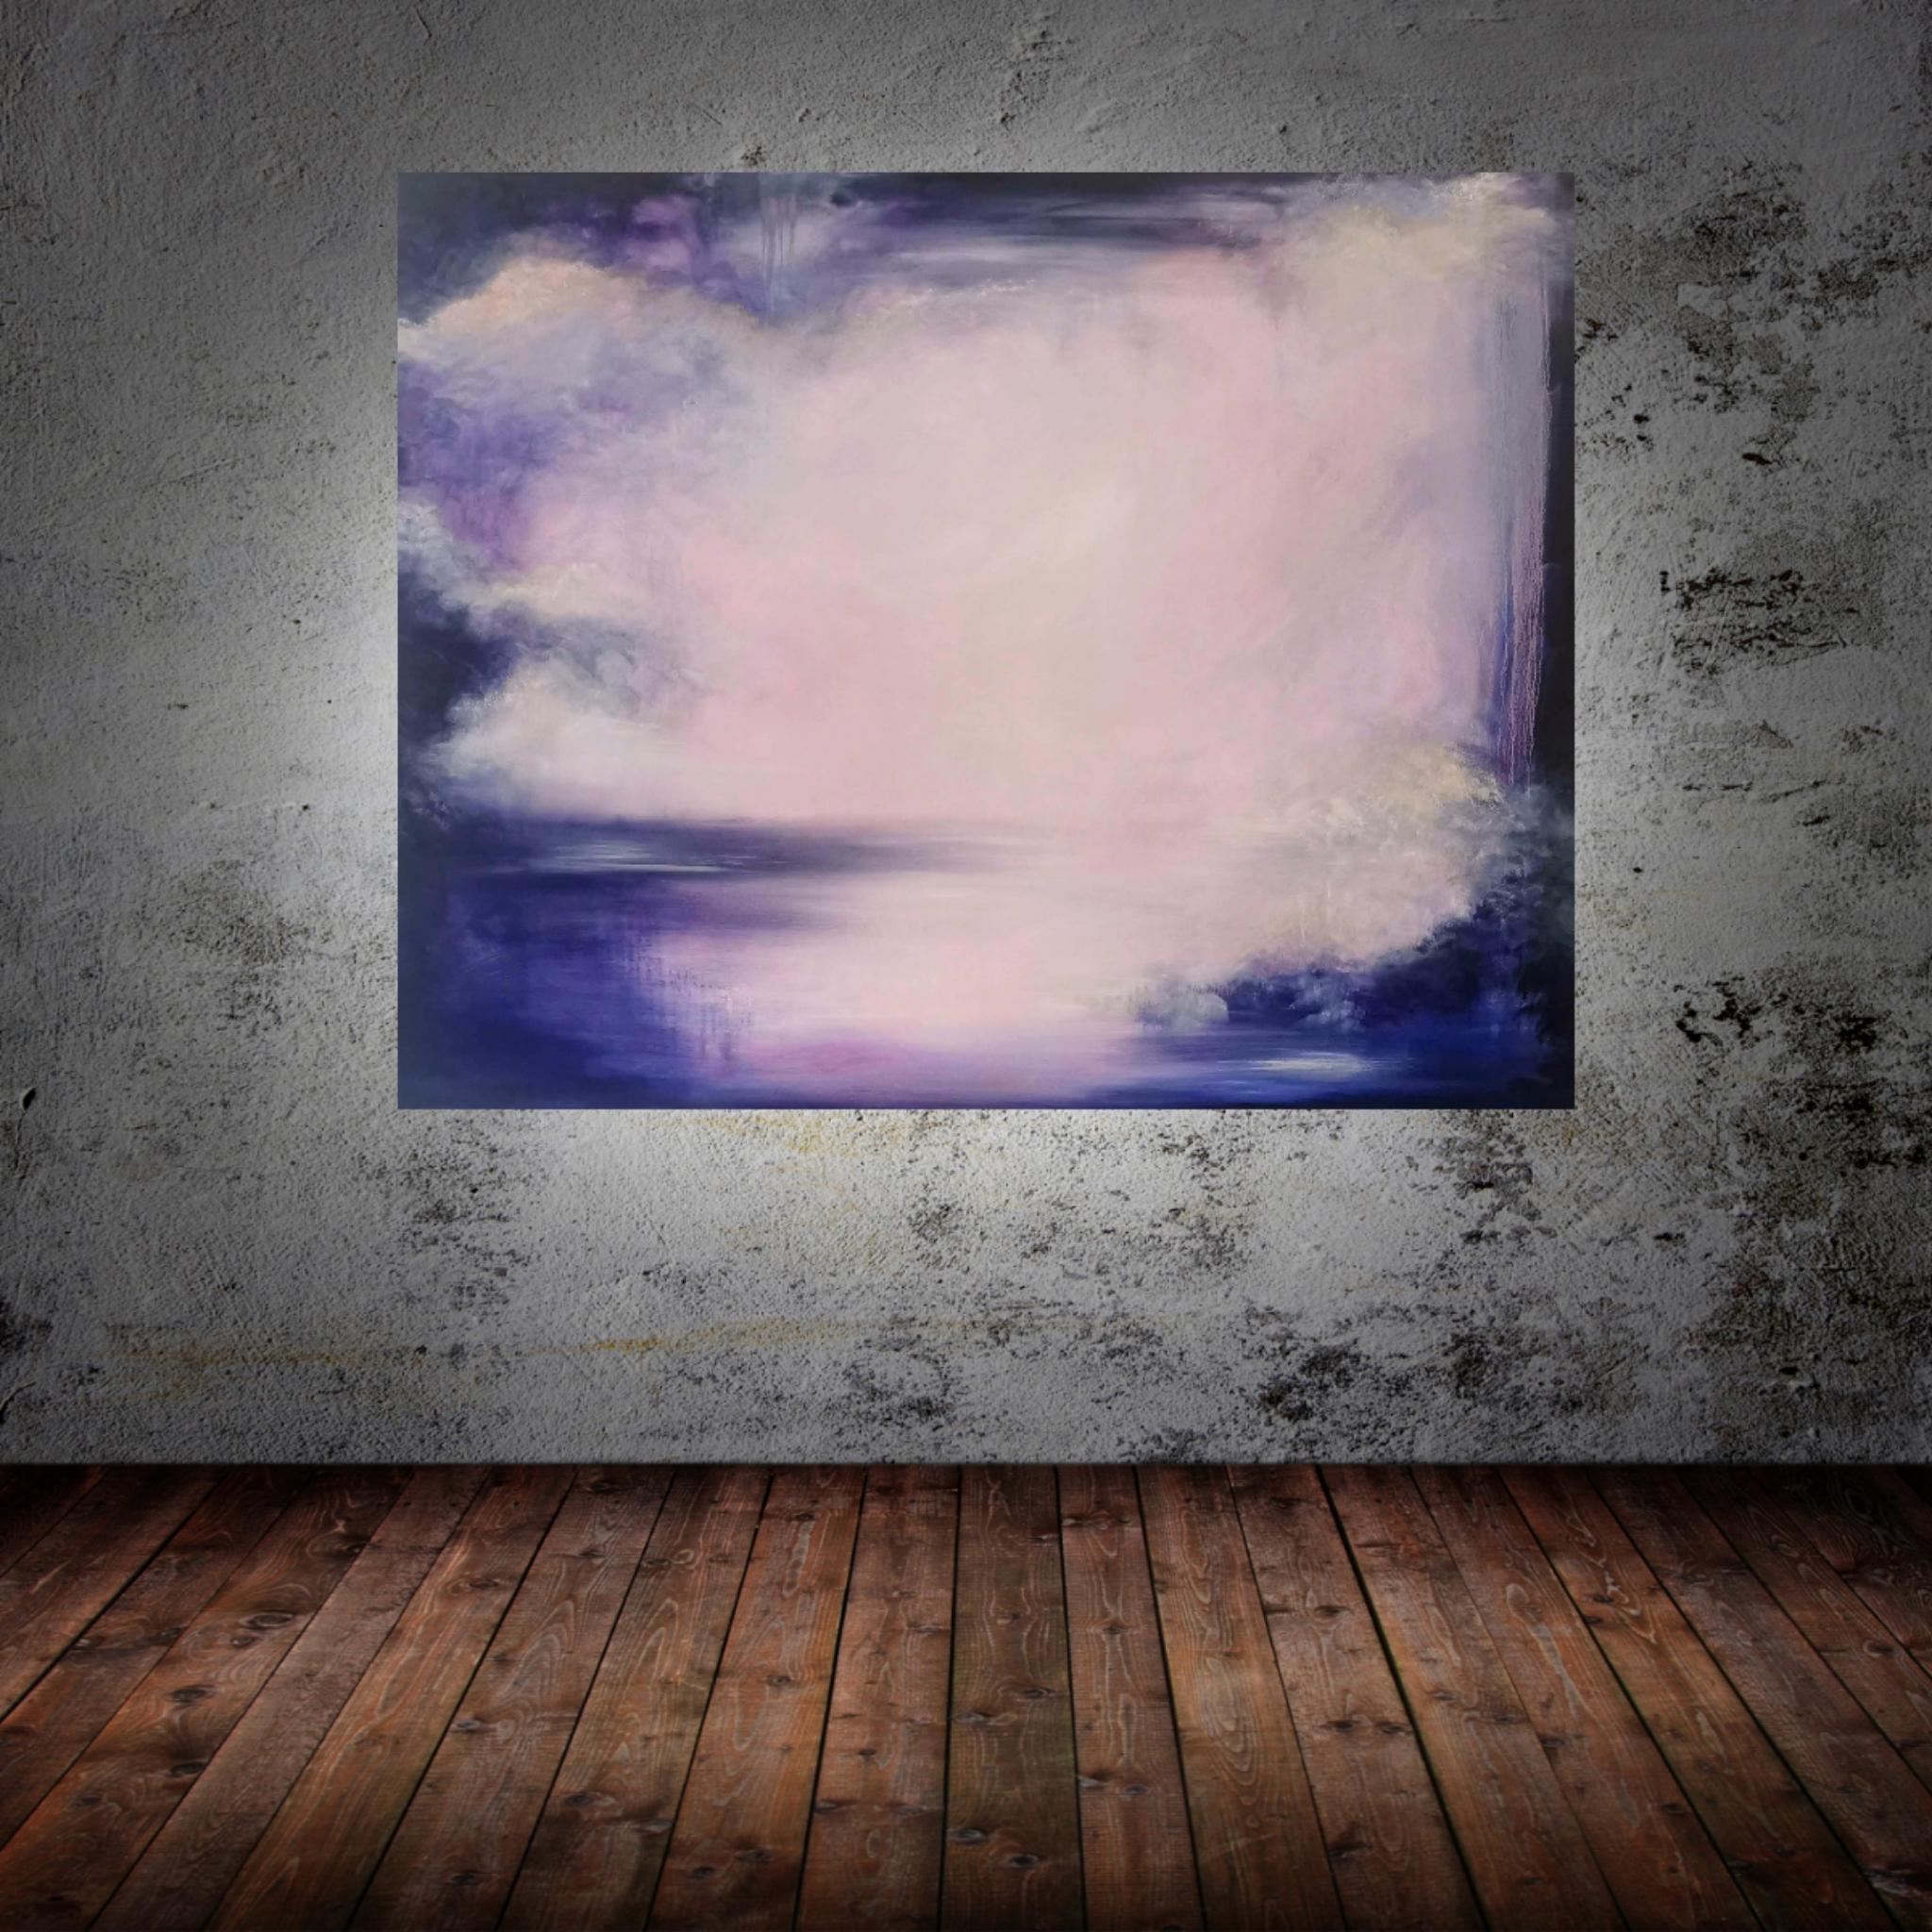 Violet night of the soul - Large violet abstract landscape painting 4